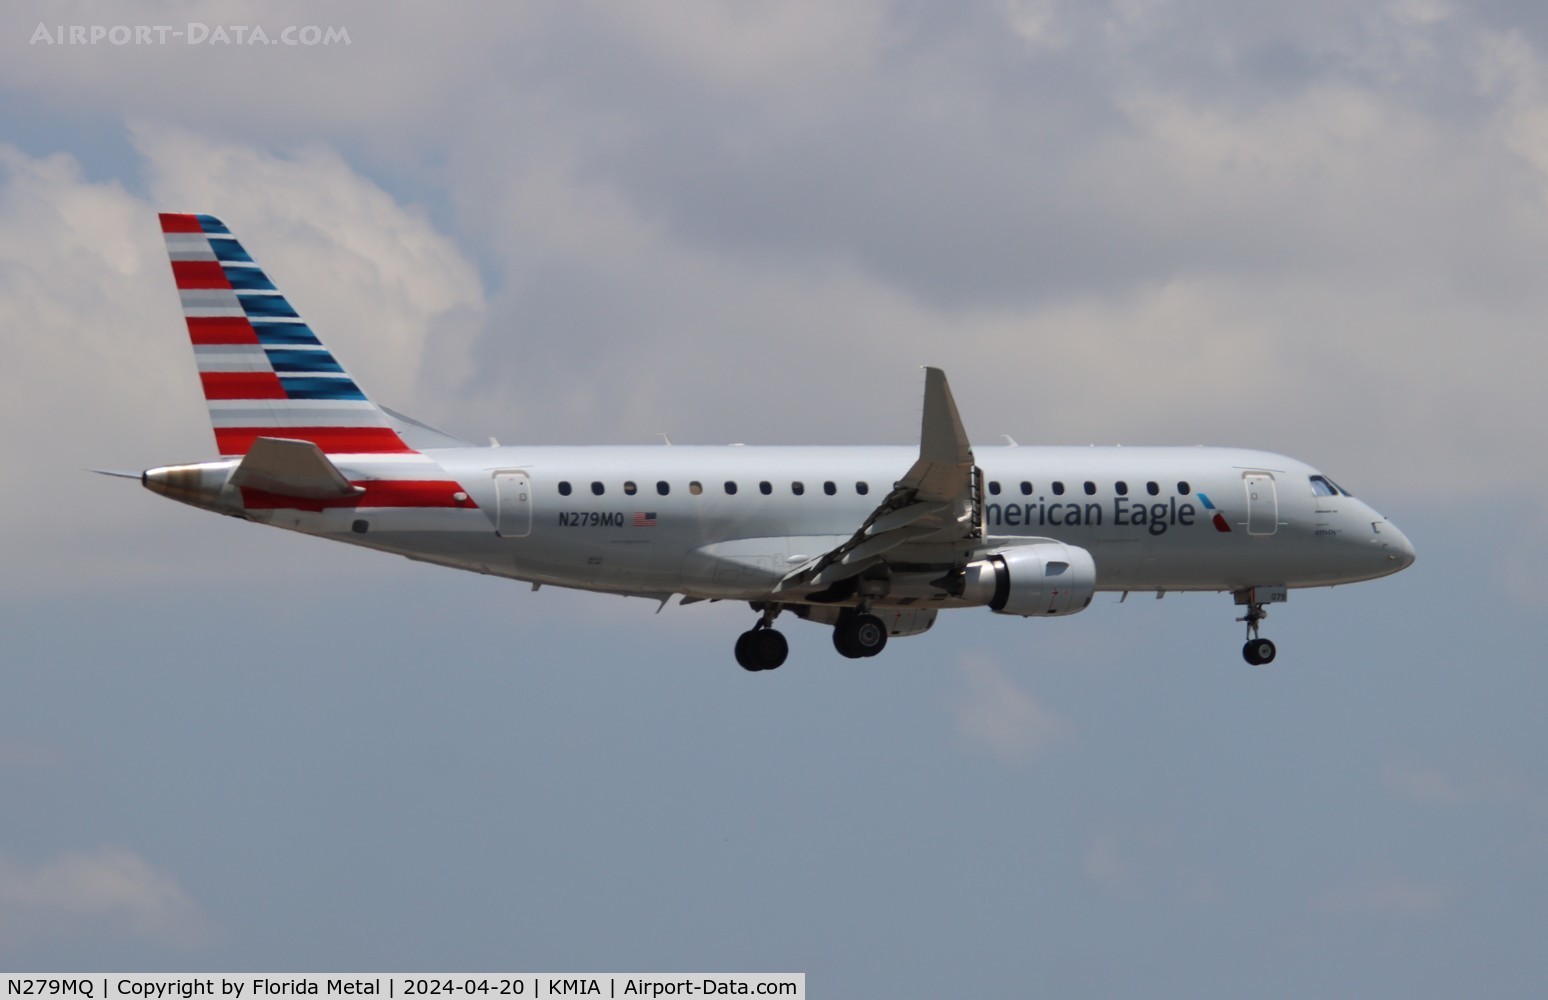 N279MQ, 2019 Embraer 175LR (ERJ-170-200LR) C/N 17000788, ENY/AE E175 zx GHB/MYEM - MIA  in from Governor's Harbour BHS